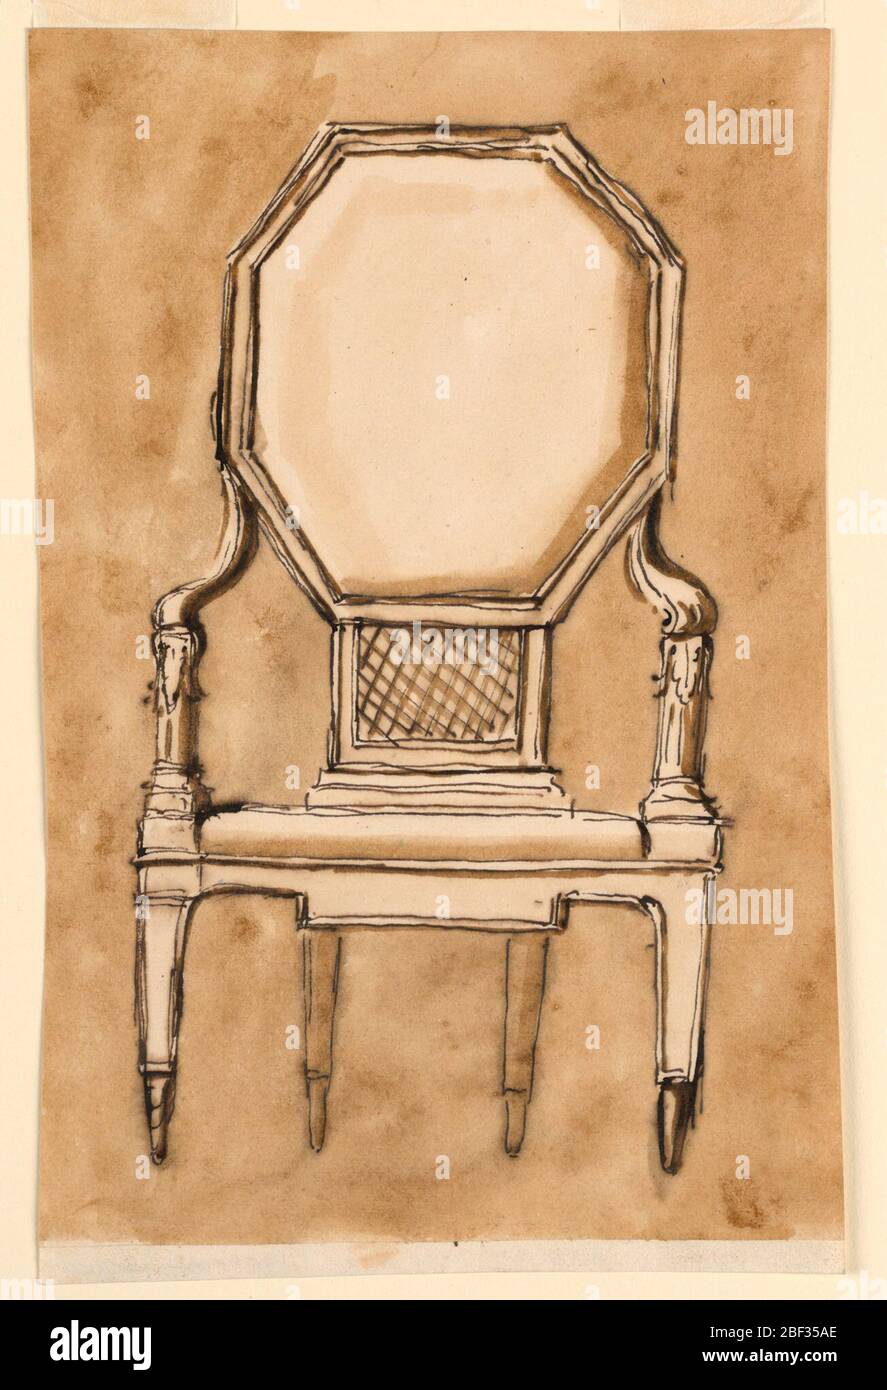 Chair. Frontal view of a chair with a large octagonal back, sloping arms terminating in acanthus leaves where the hands would rest, tapered geometric legs, and caning connecting the back to the seat. Stock Photo